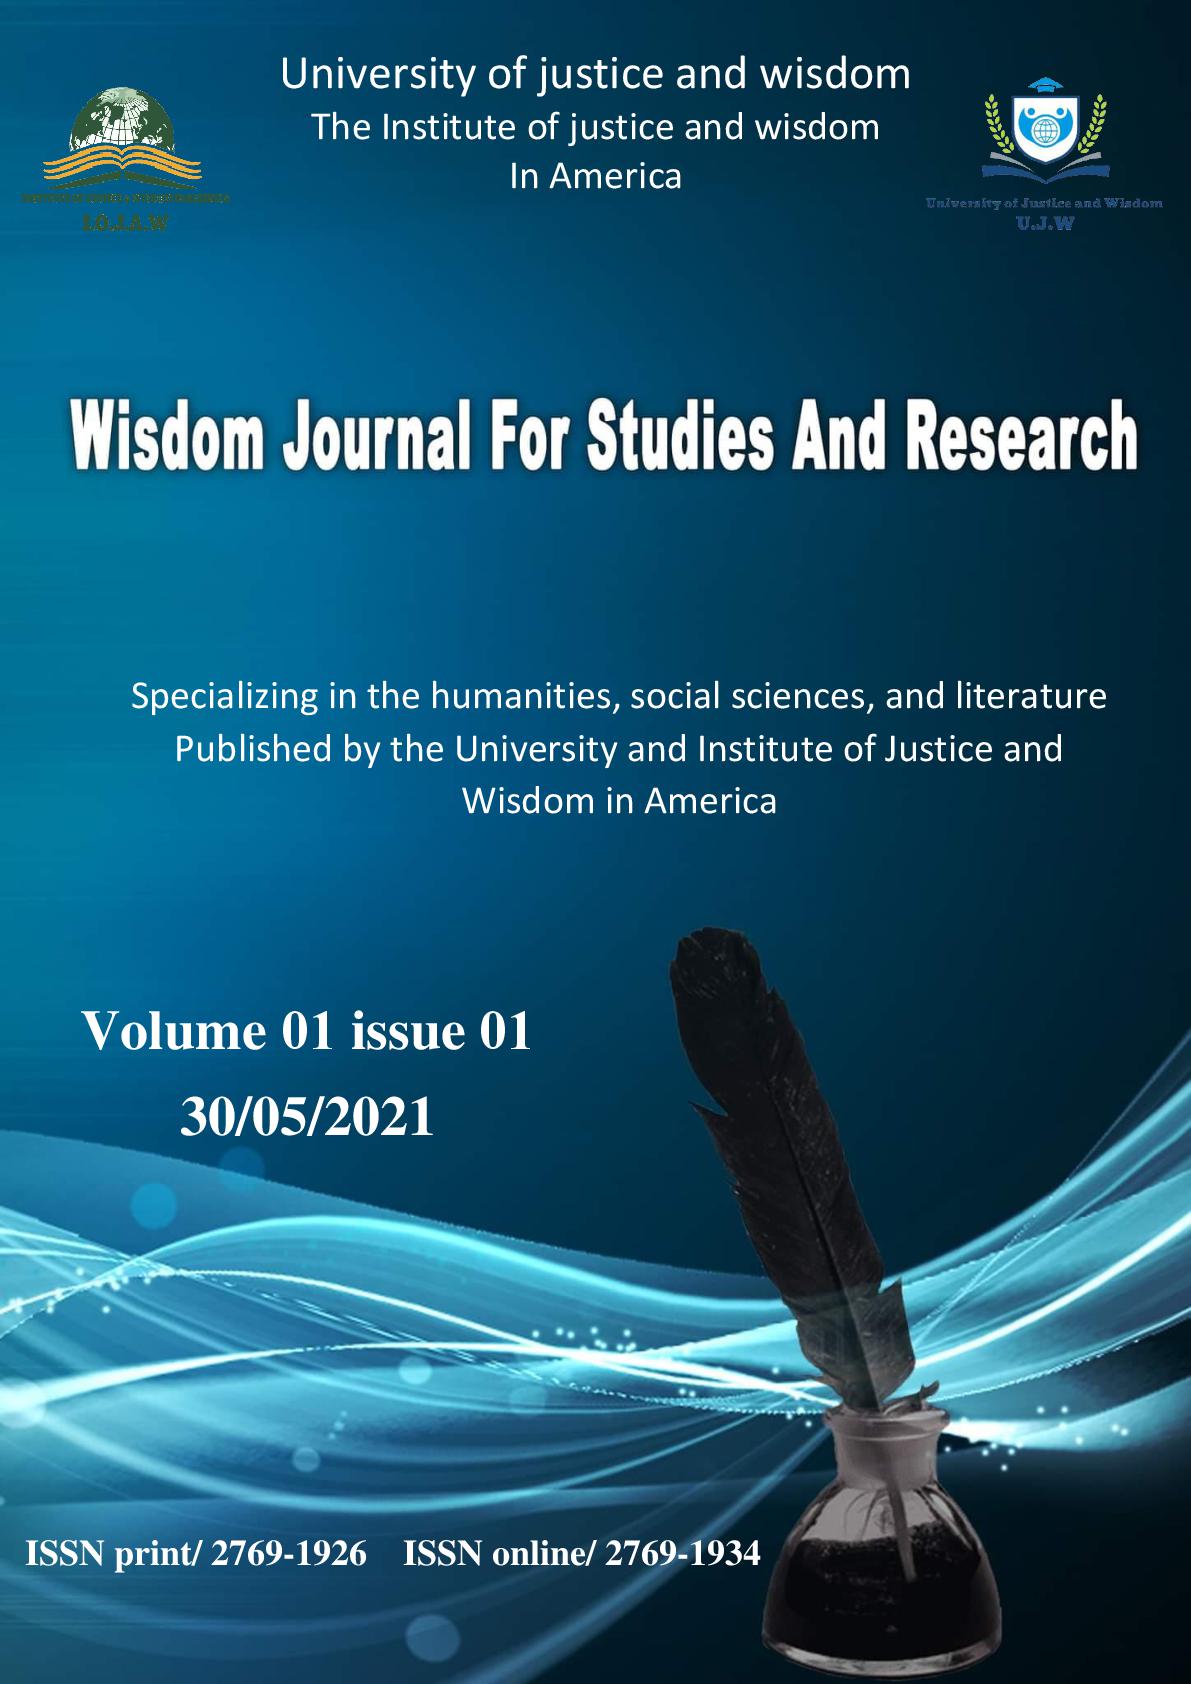 The Journal of Wisdom for Studies and Research (J.O.W. F.S.R.)